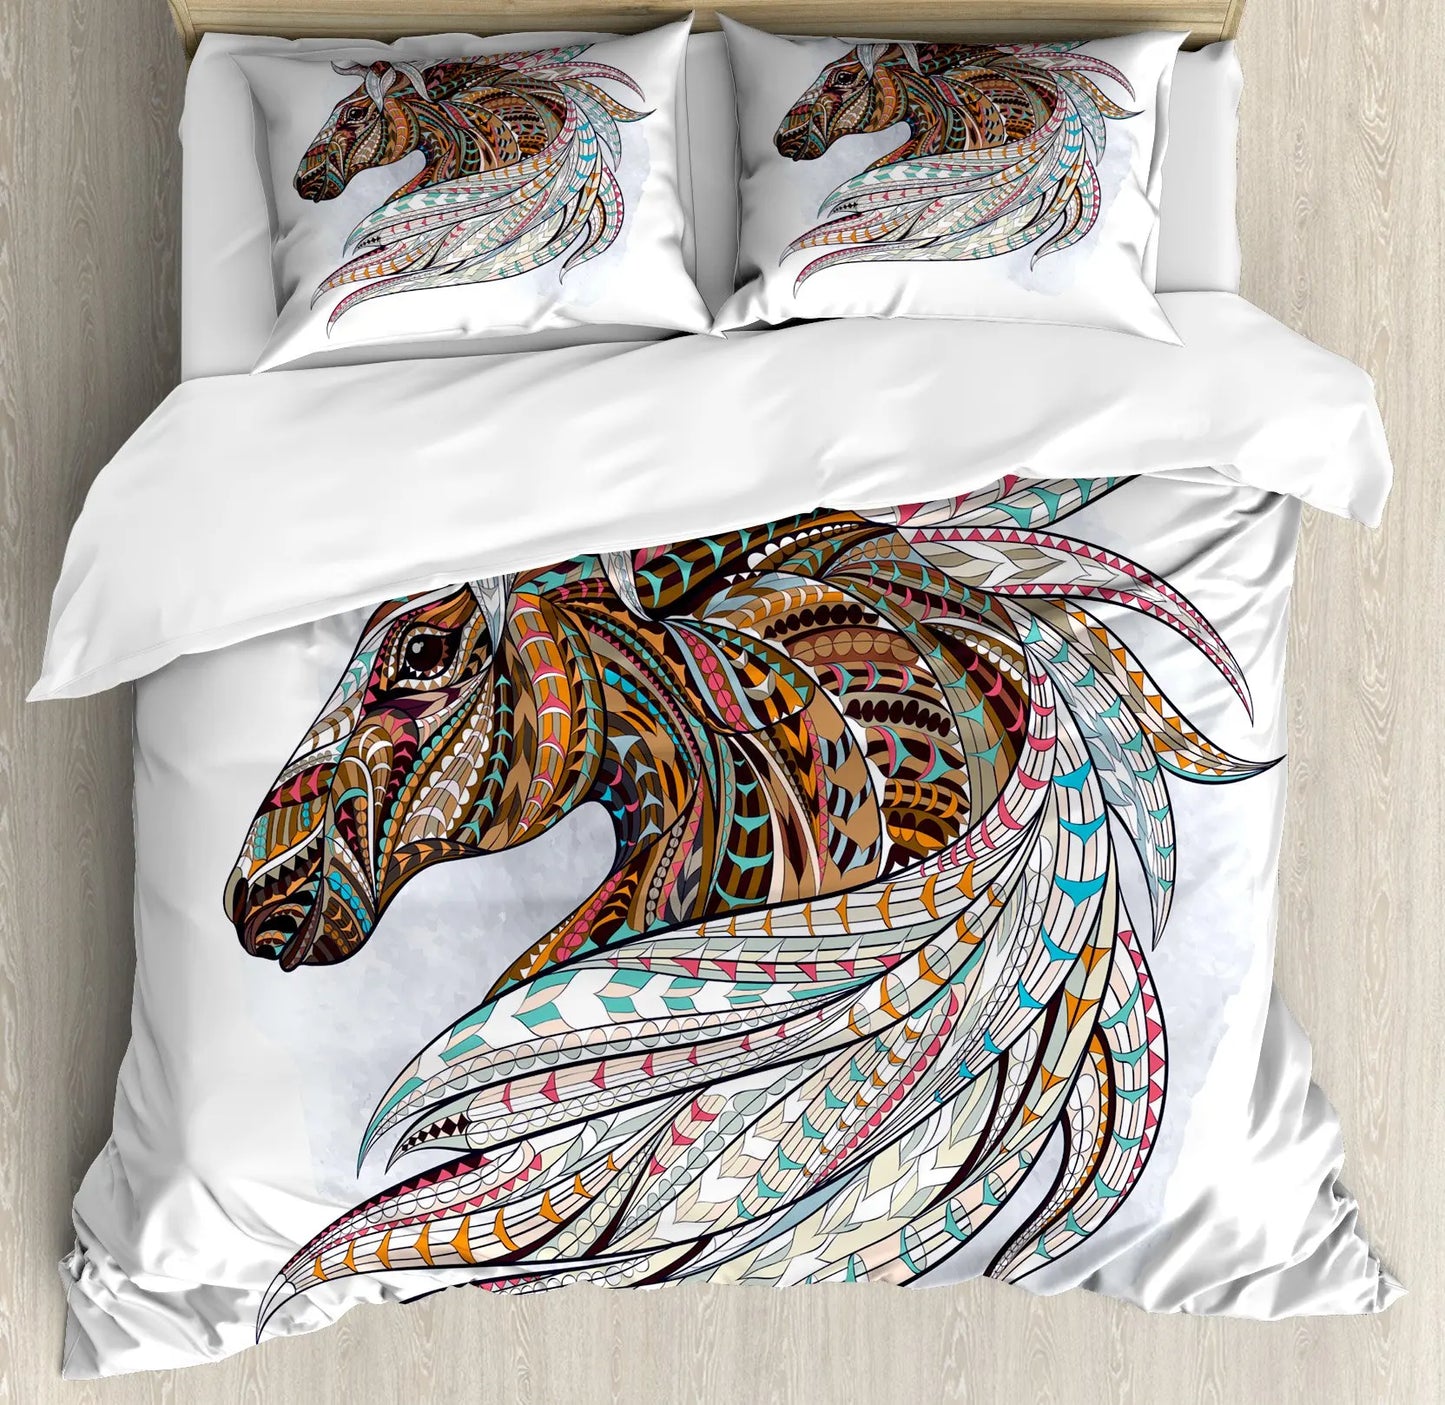 Domineering Galloping Horse Printed Duvet Cover Set 3D Luxury Bedding Set with Pillowcase Bedroom Quilt Covers 2/3pcs Queen Size